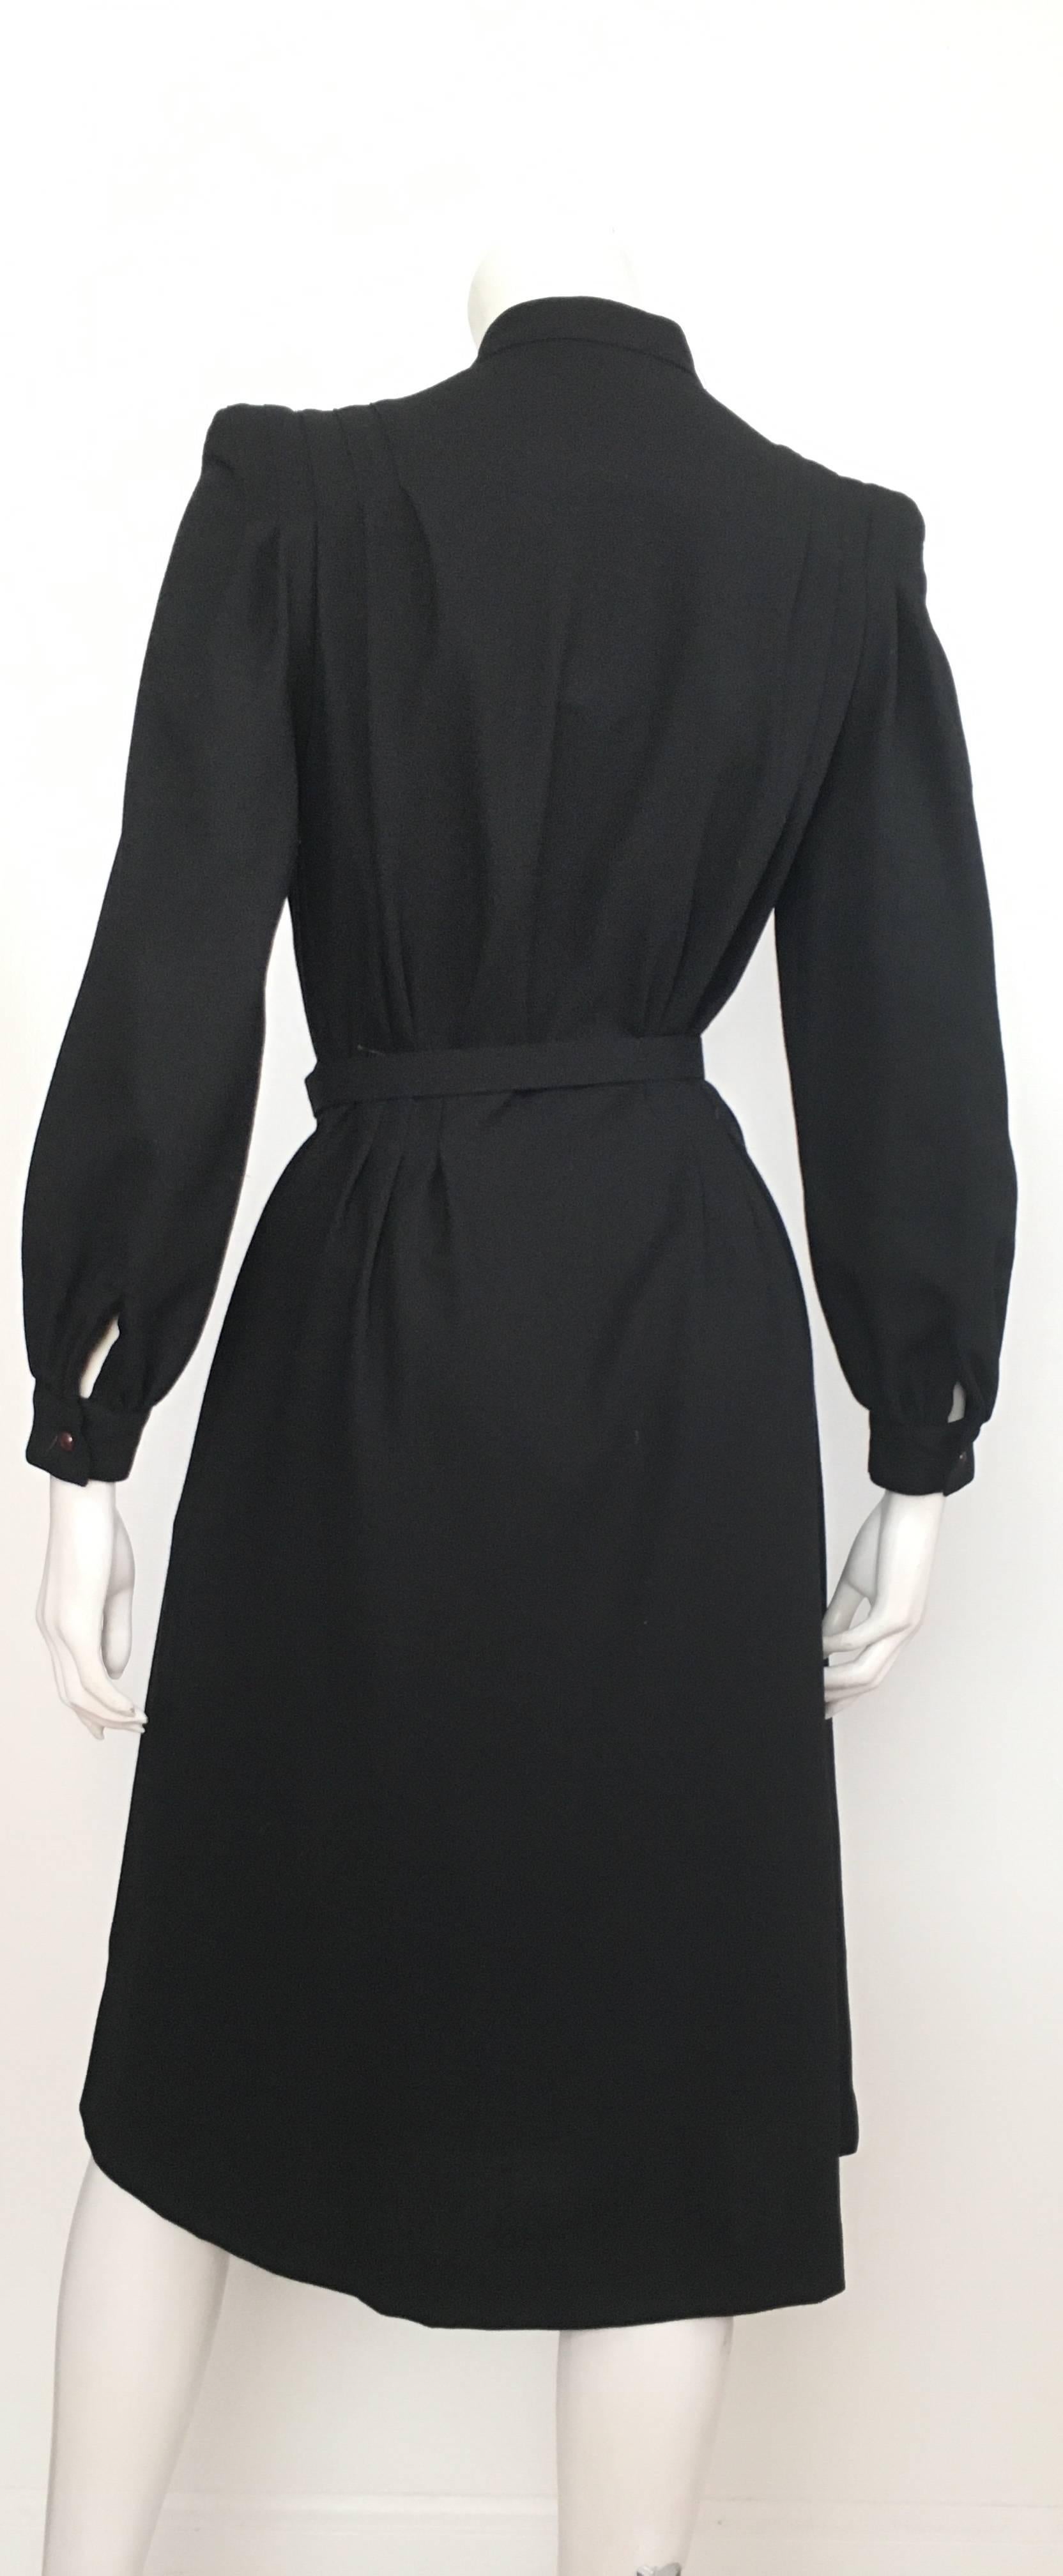 Pierre Cardin 1980s Black Wool Button Up Dress with Pockets Size 6/8. 1